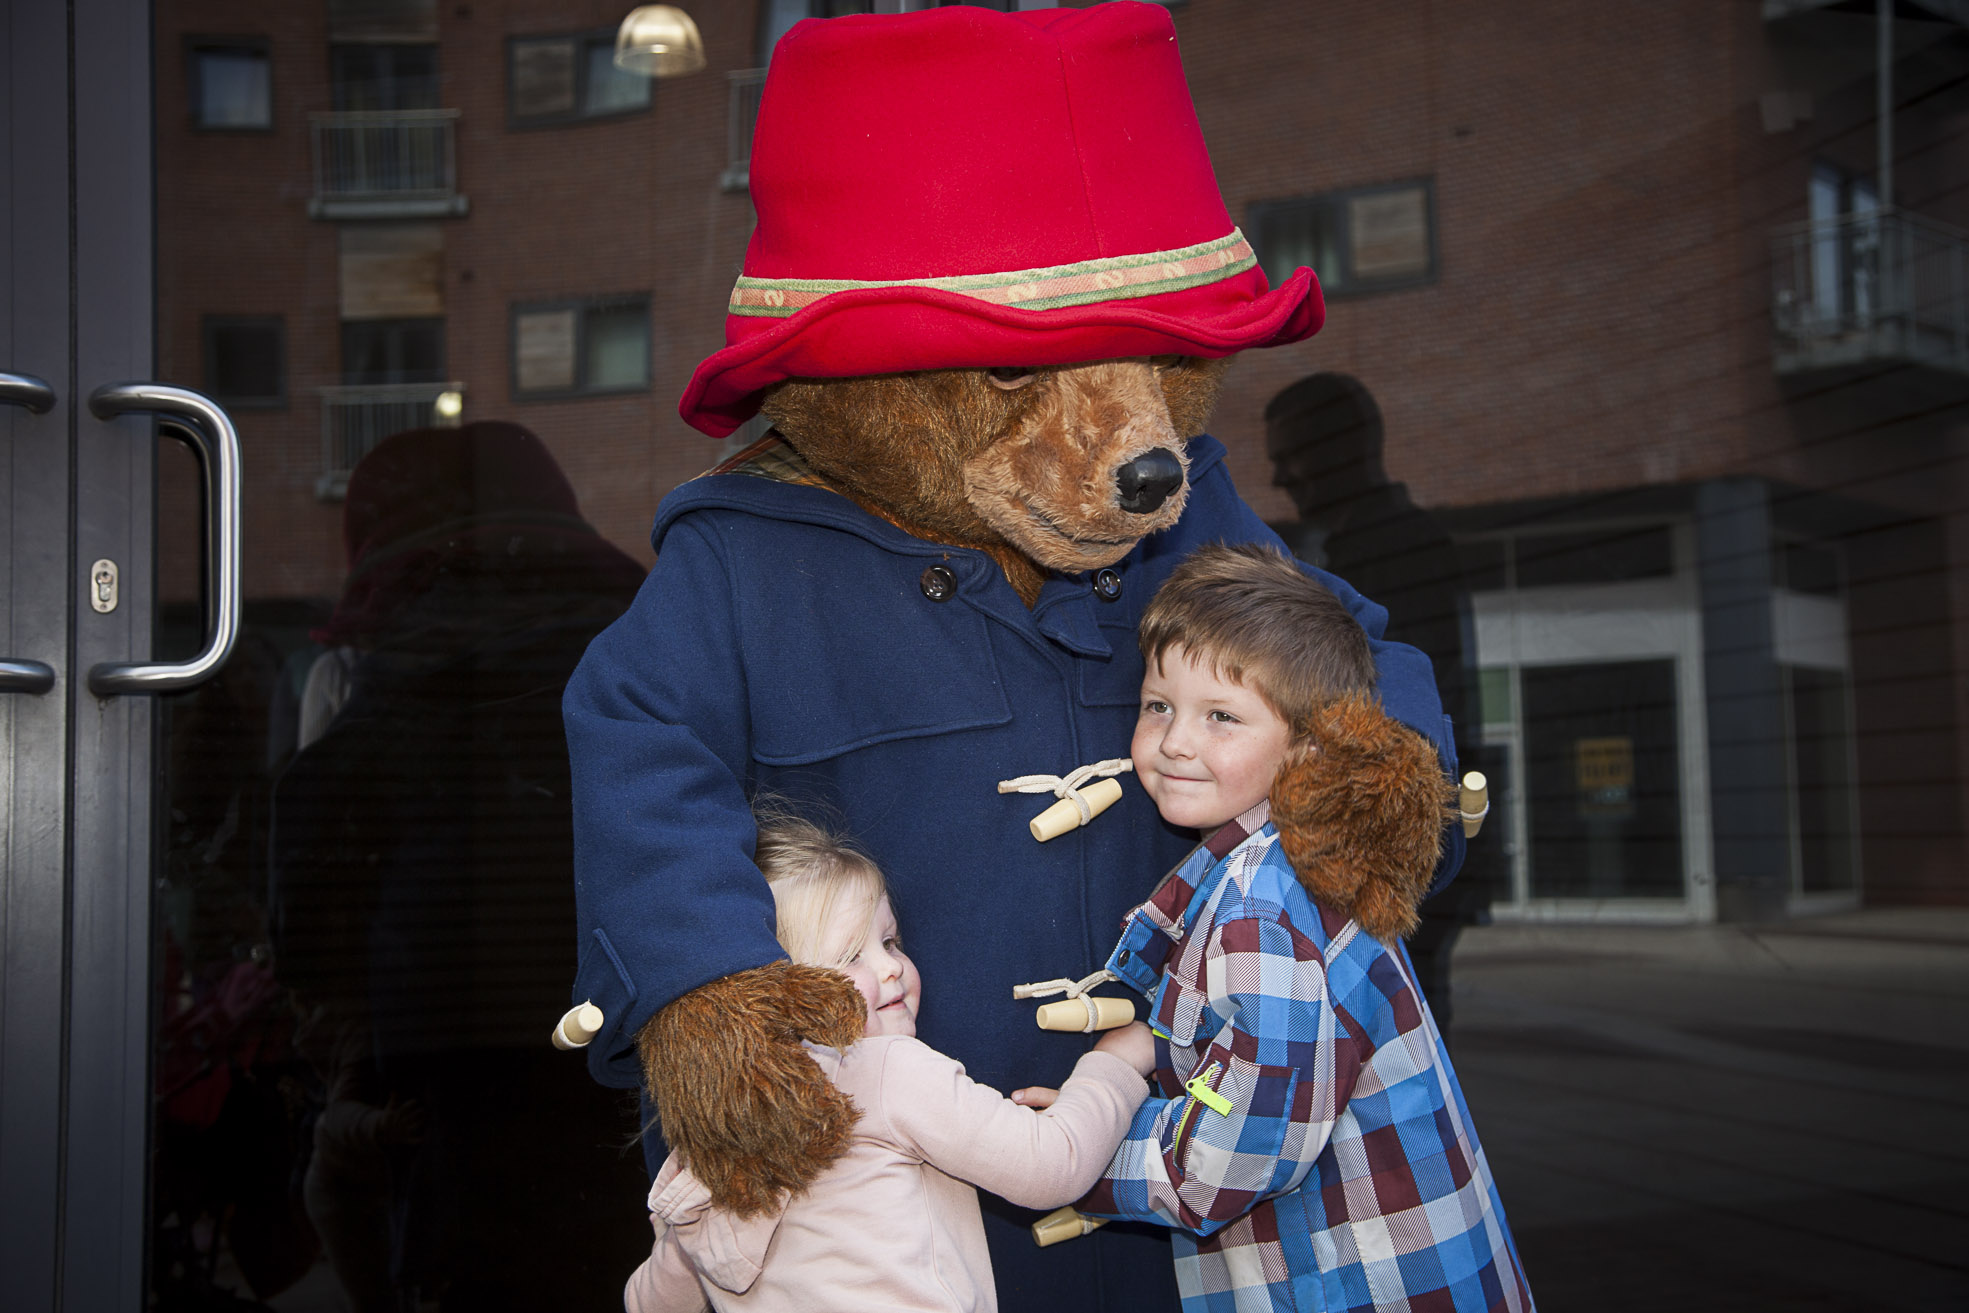 Excited young fans queue to see their furry hero Paddington Bear